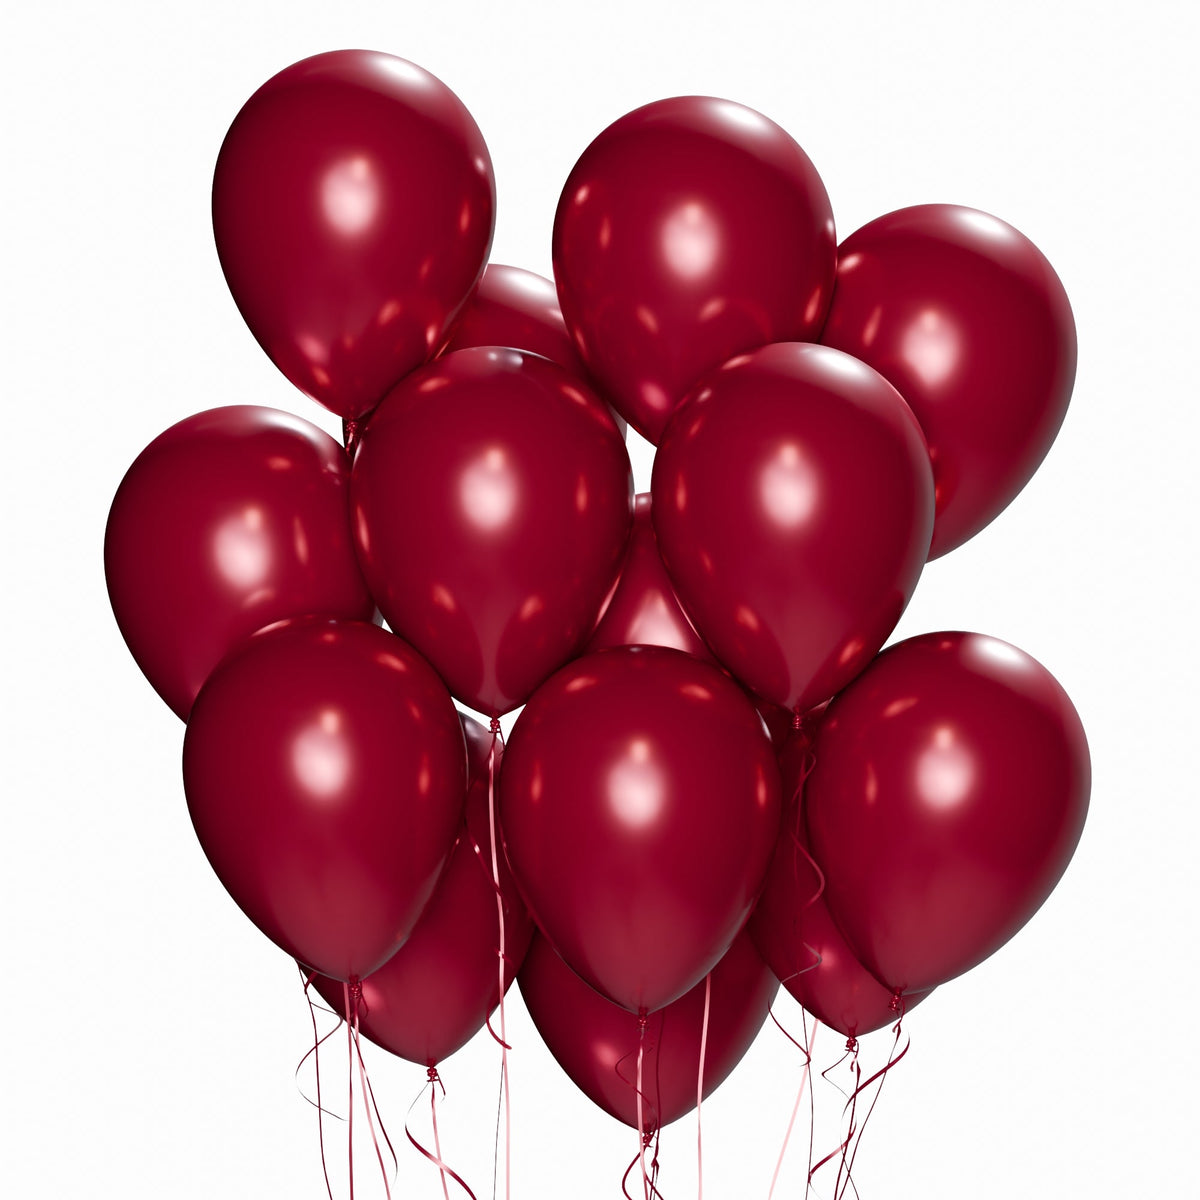 WIDE OCEAN INTERNATIONAL TRADE BEIJING CO., LTD Balloons Burgundy Latex Balloon 12 Inches, Pearl Collection, 15 Count 810077652596